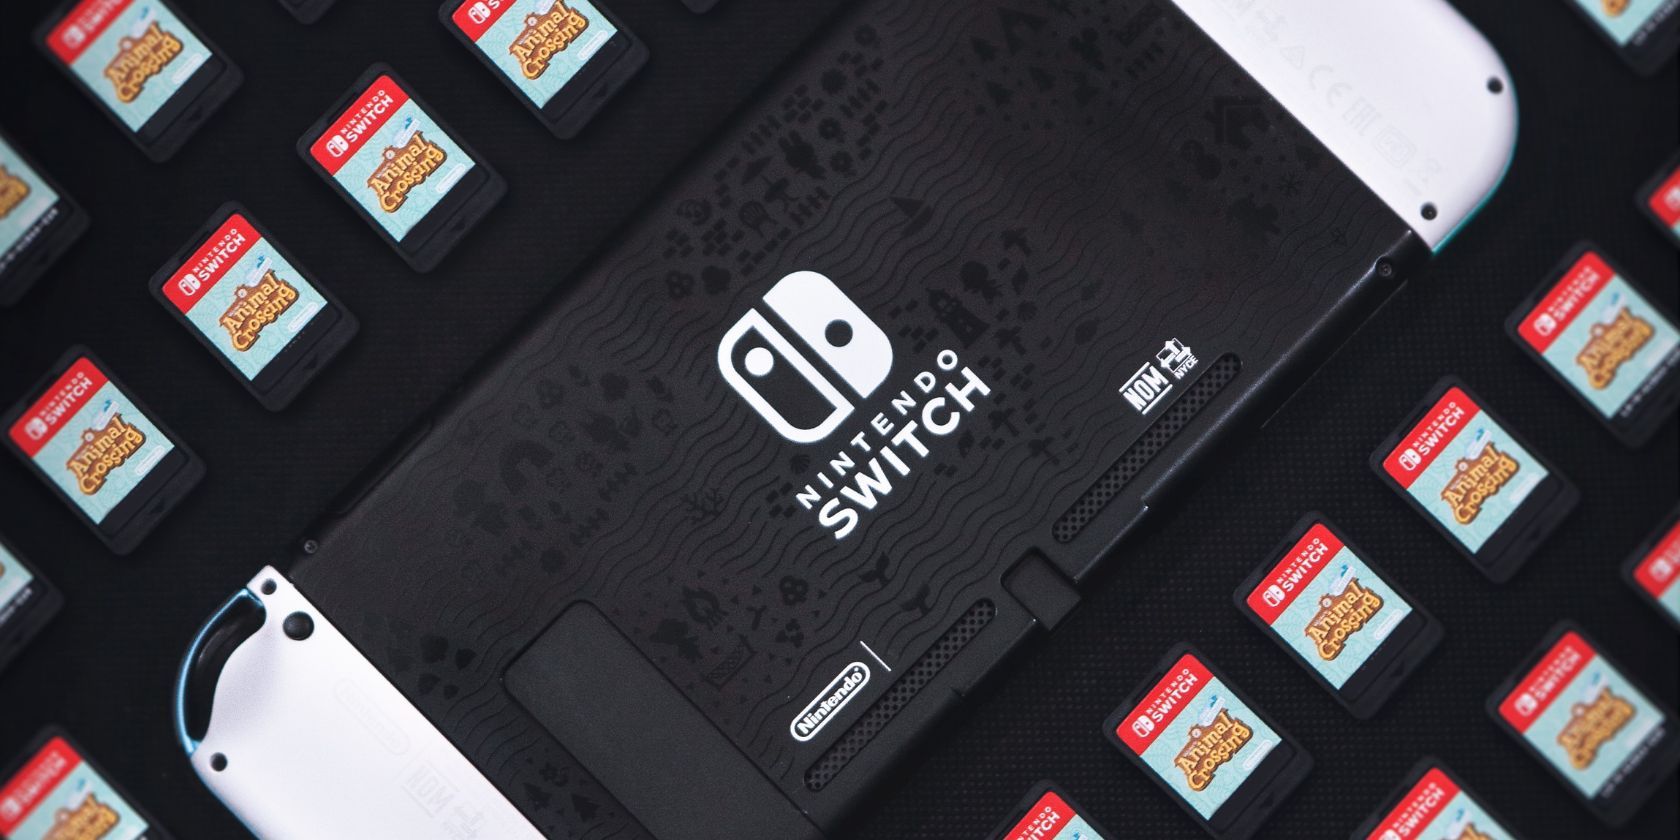 Animal Crossing game cartridges and themed switch